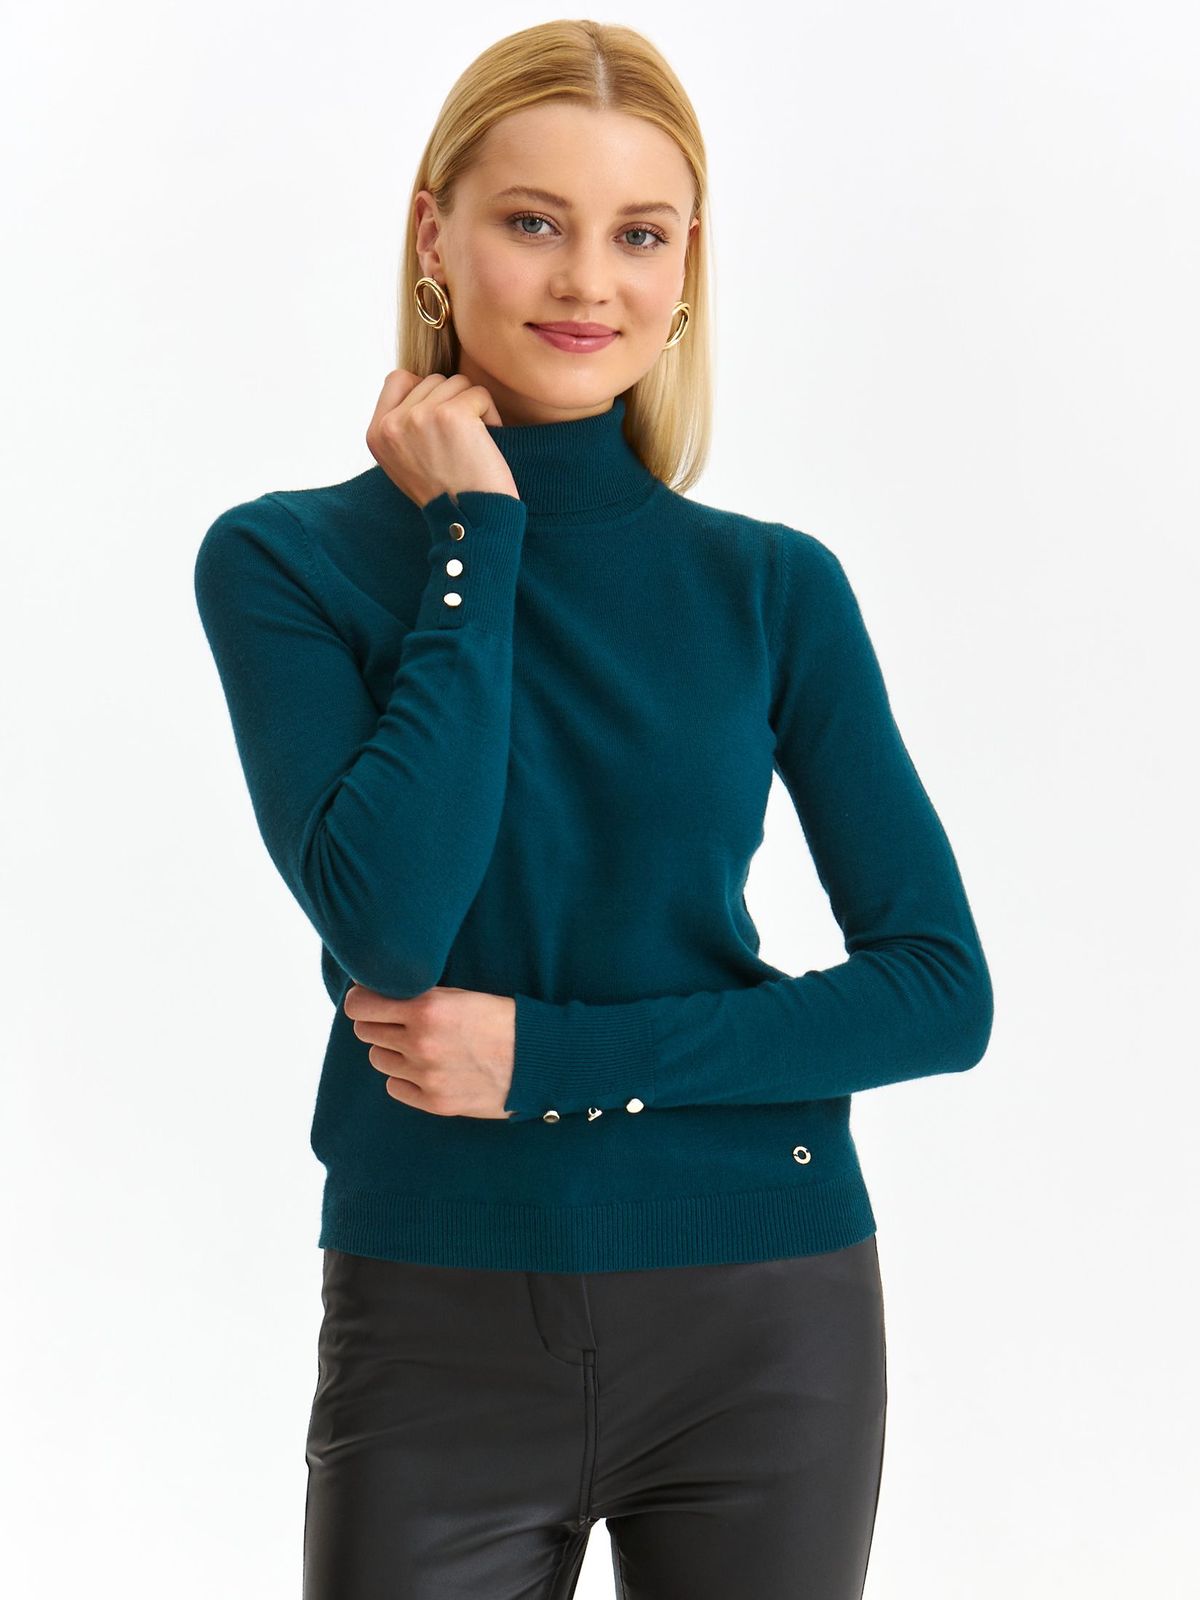 Green sweater knitted tented high collar